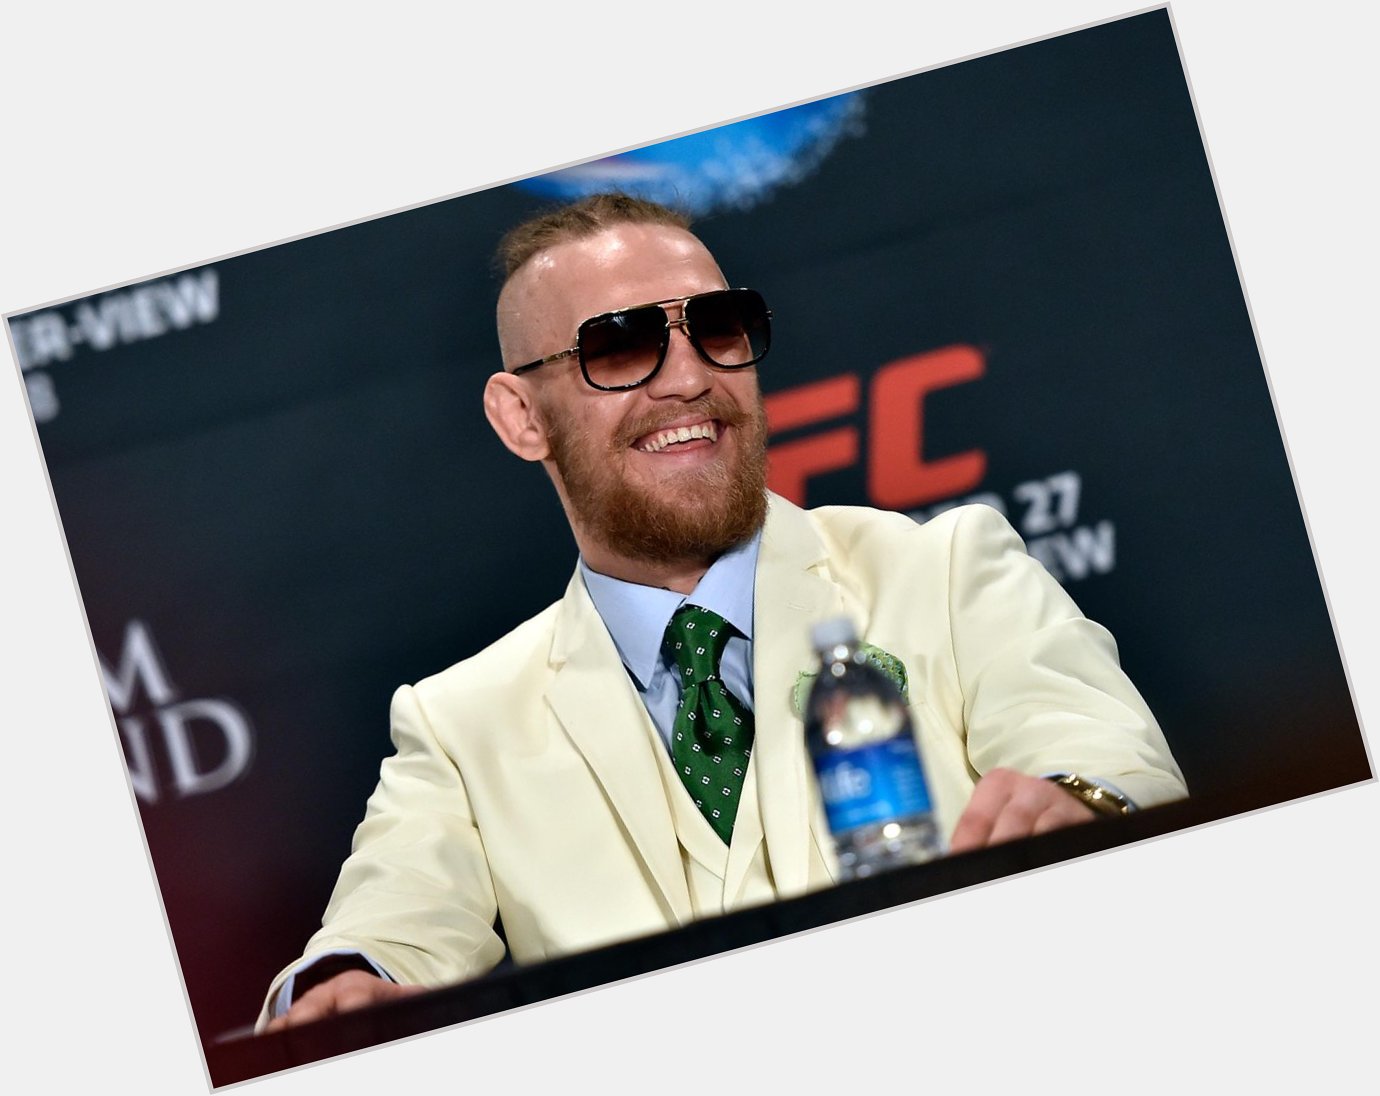 Happy birthday 27 pictures of Conor McGregor as the UFC star turns 27
 